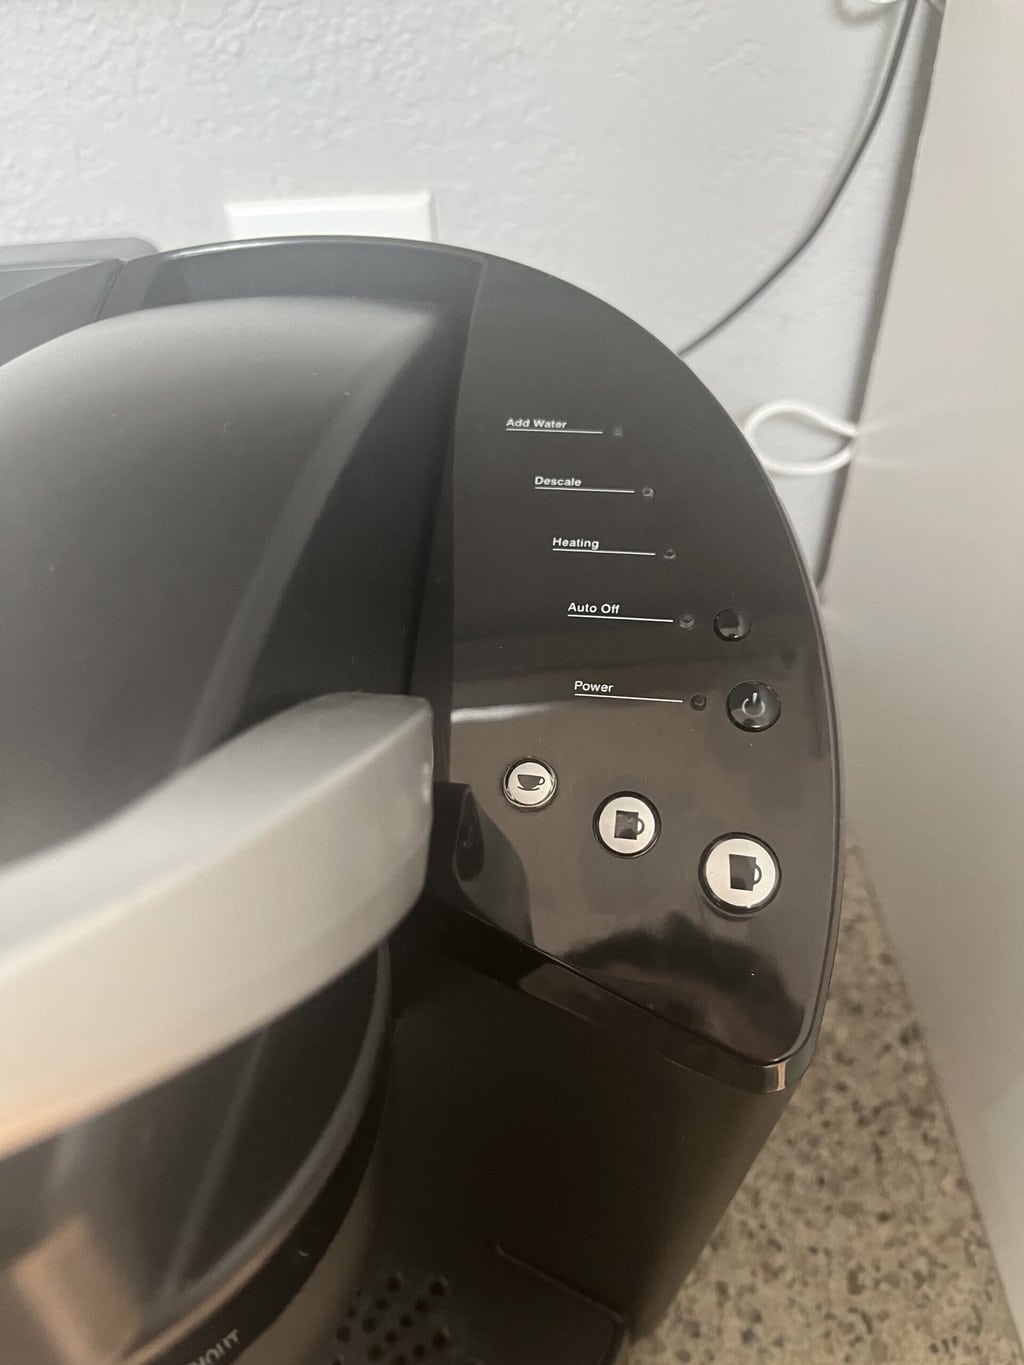 What are the Keurig Cup Sizes? 